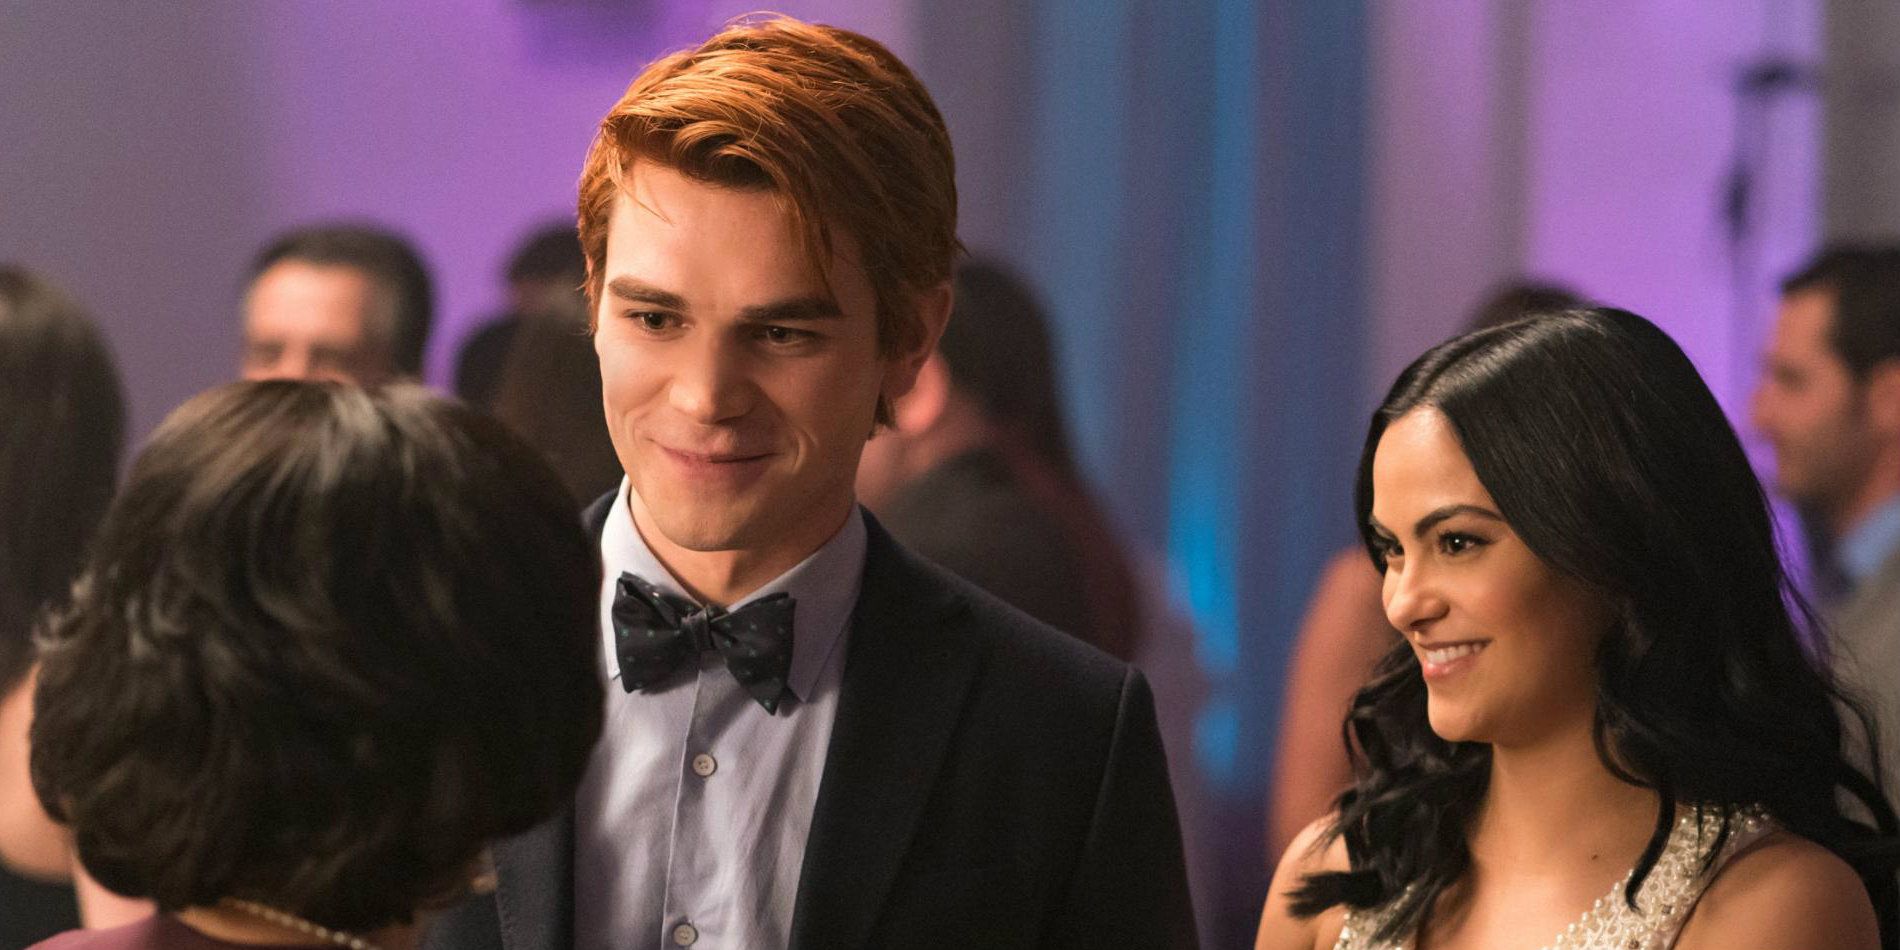 Archie and Veronica smile during prom in Riverdale.